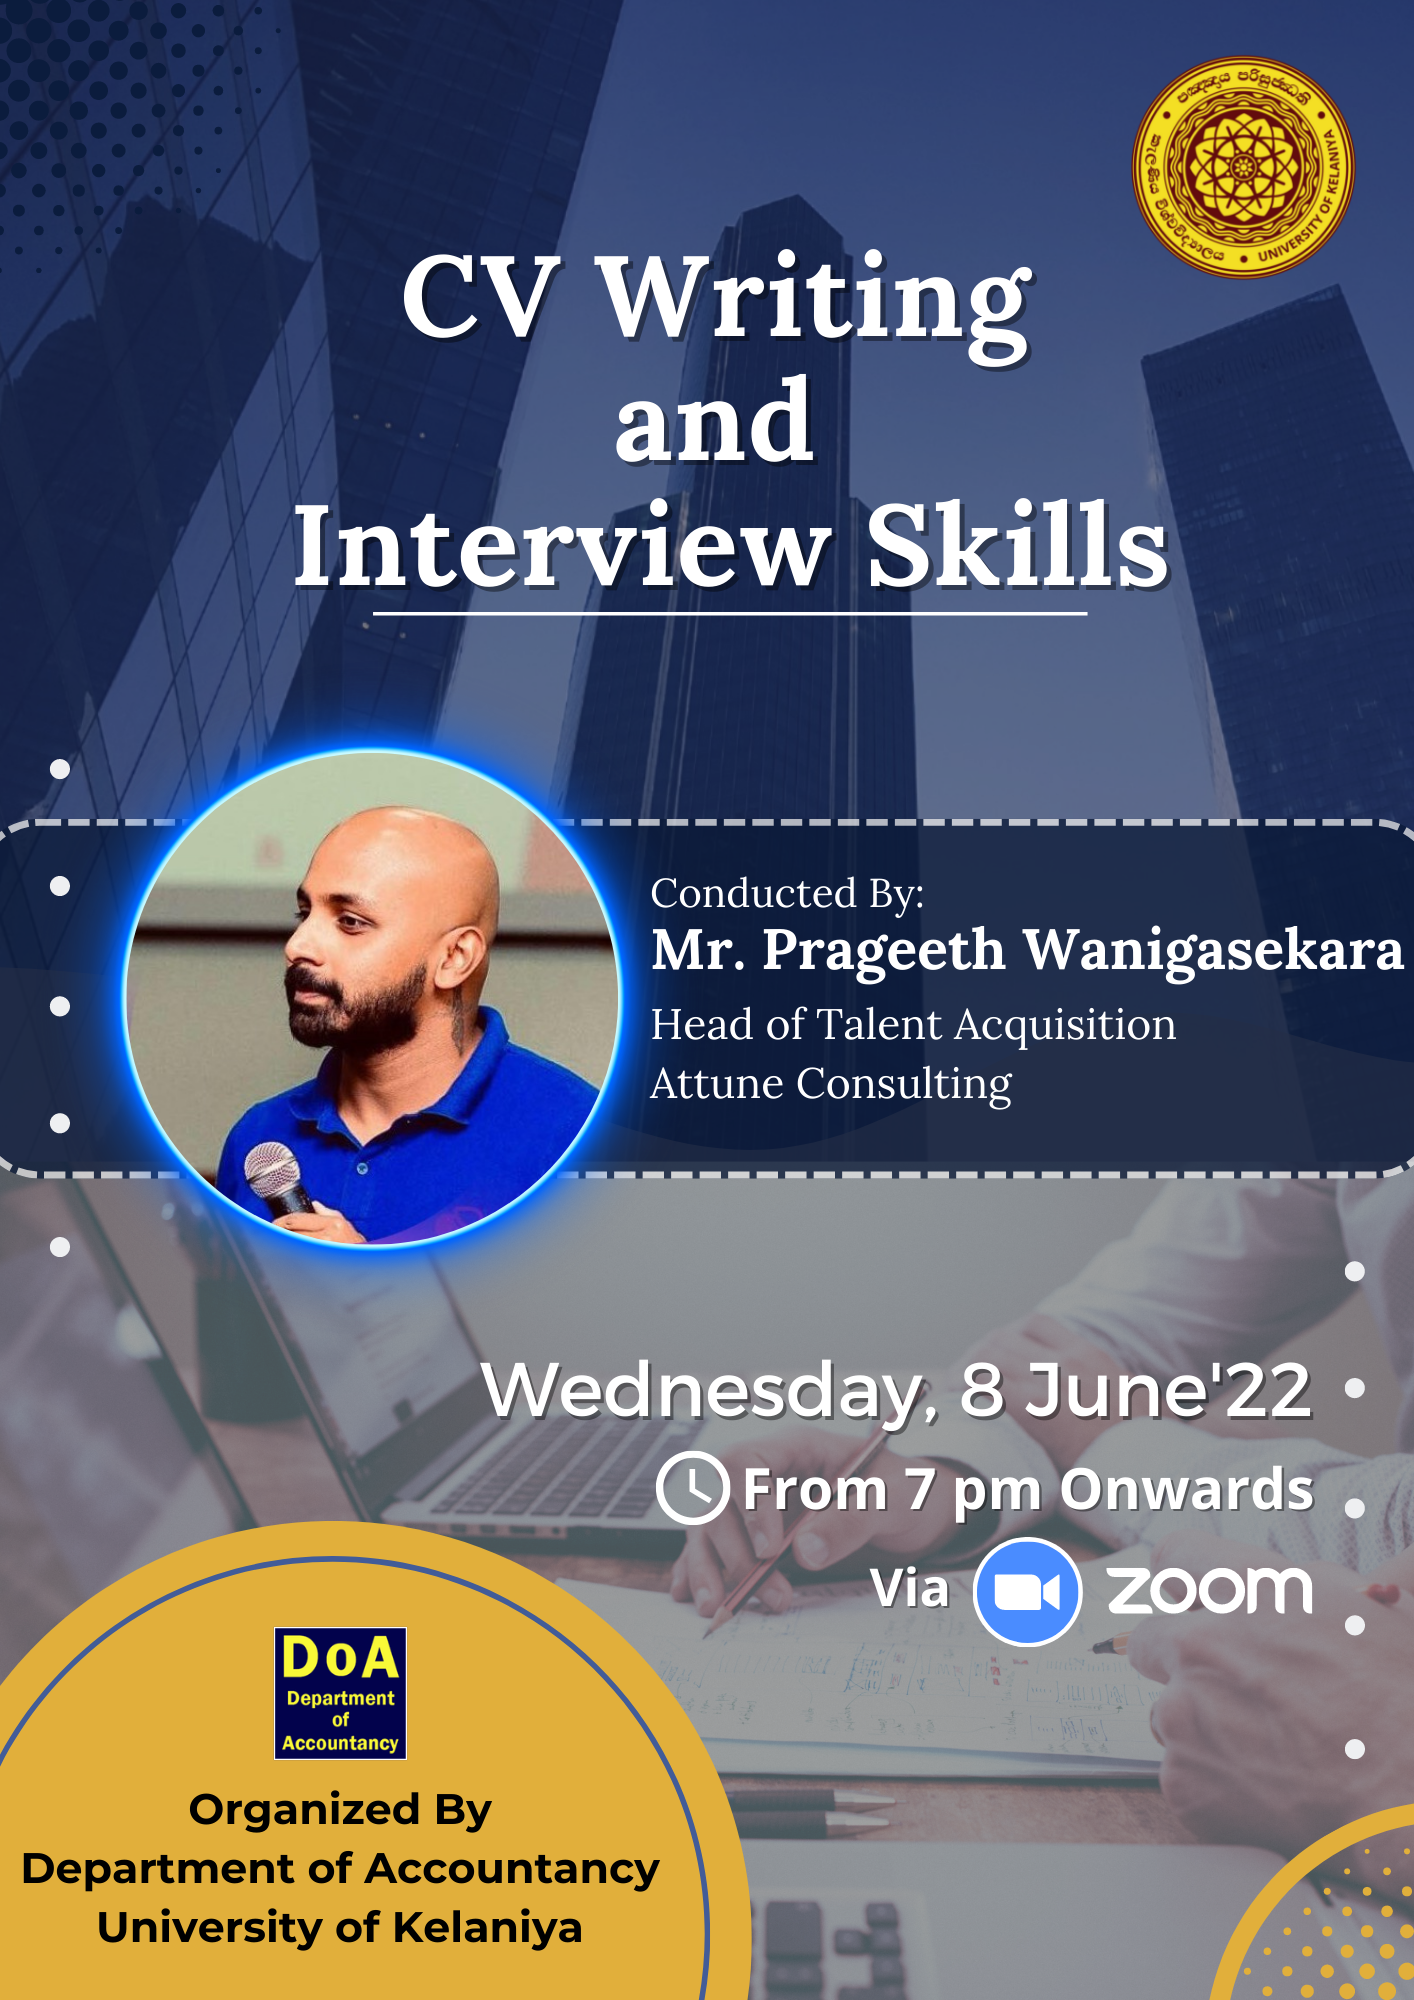 Workshop on CV Writing and Interview Skills